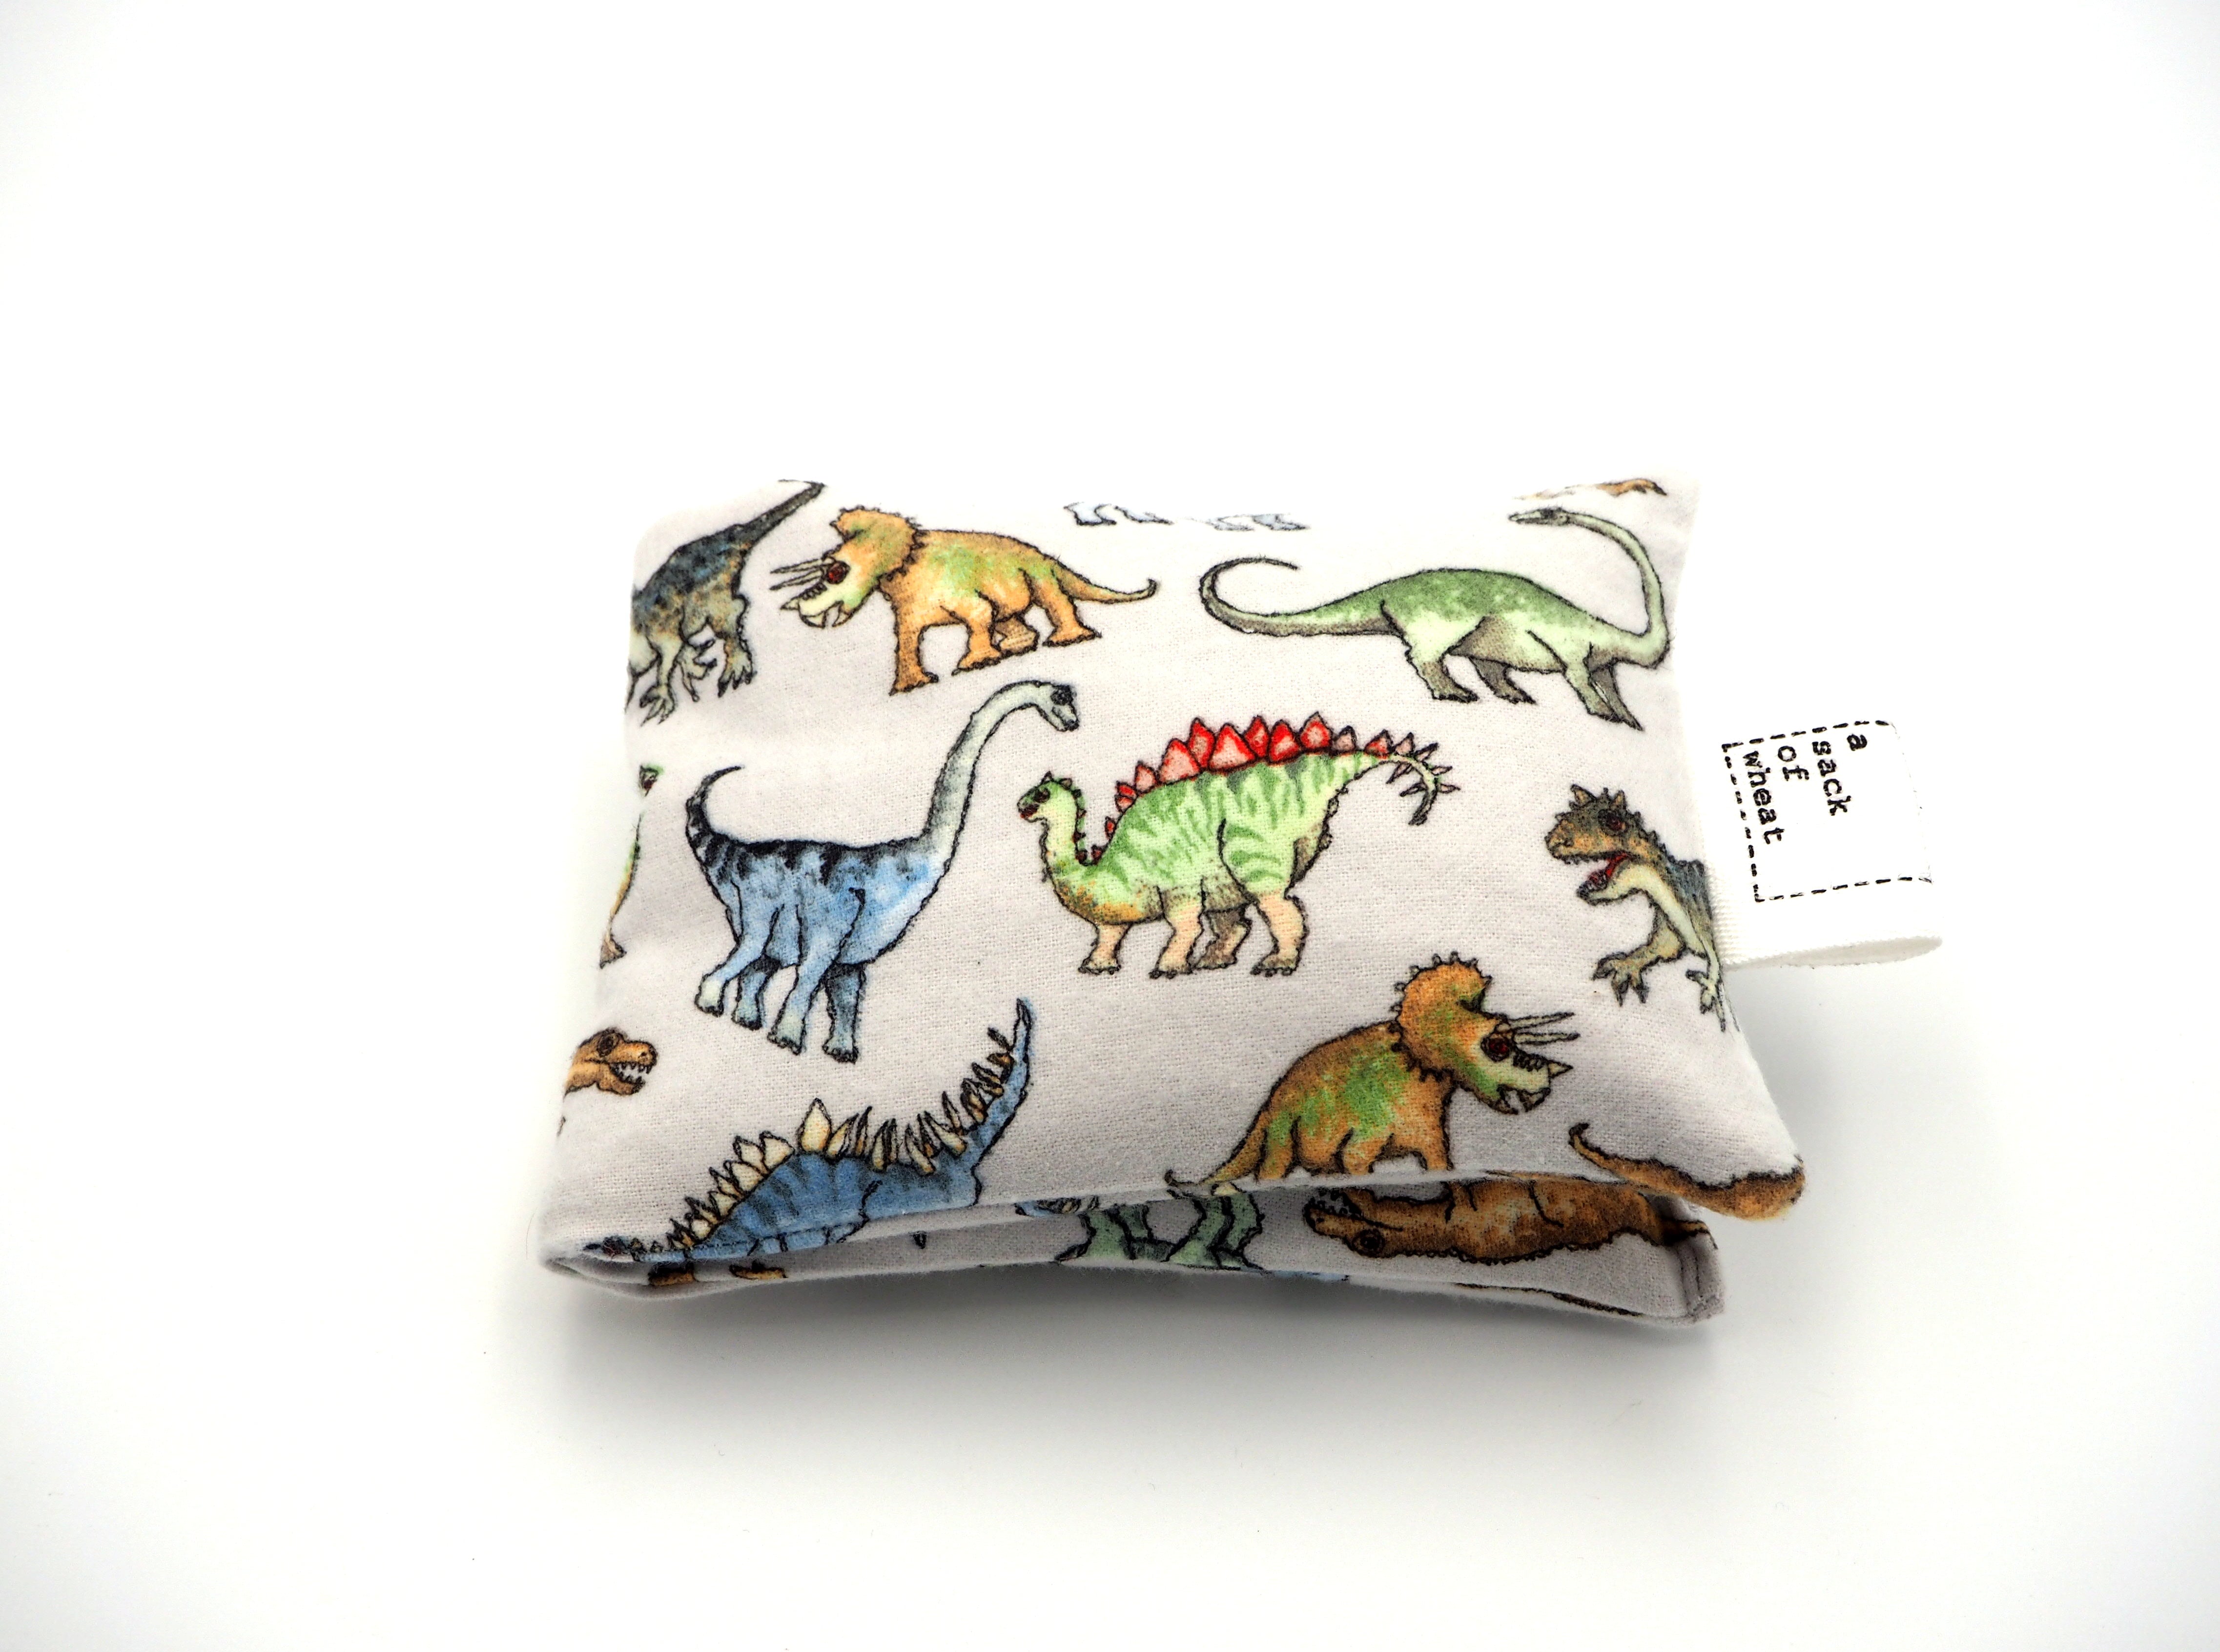 Folded view of A Sack Of Wheat, featuring colorful dinosaurs on 100% cotton flannelette fabric